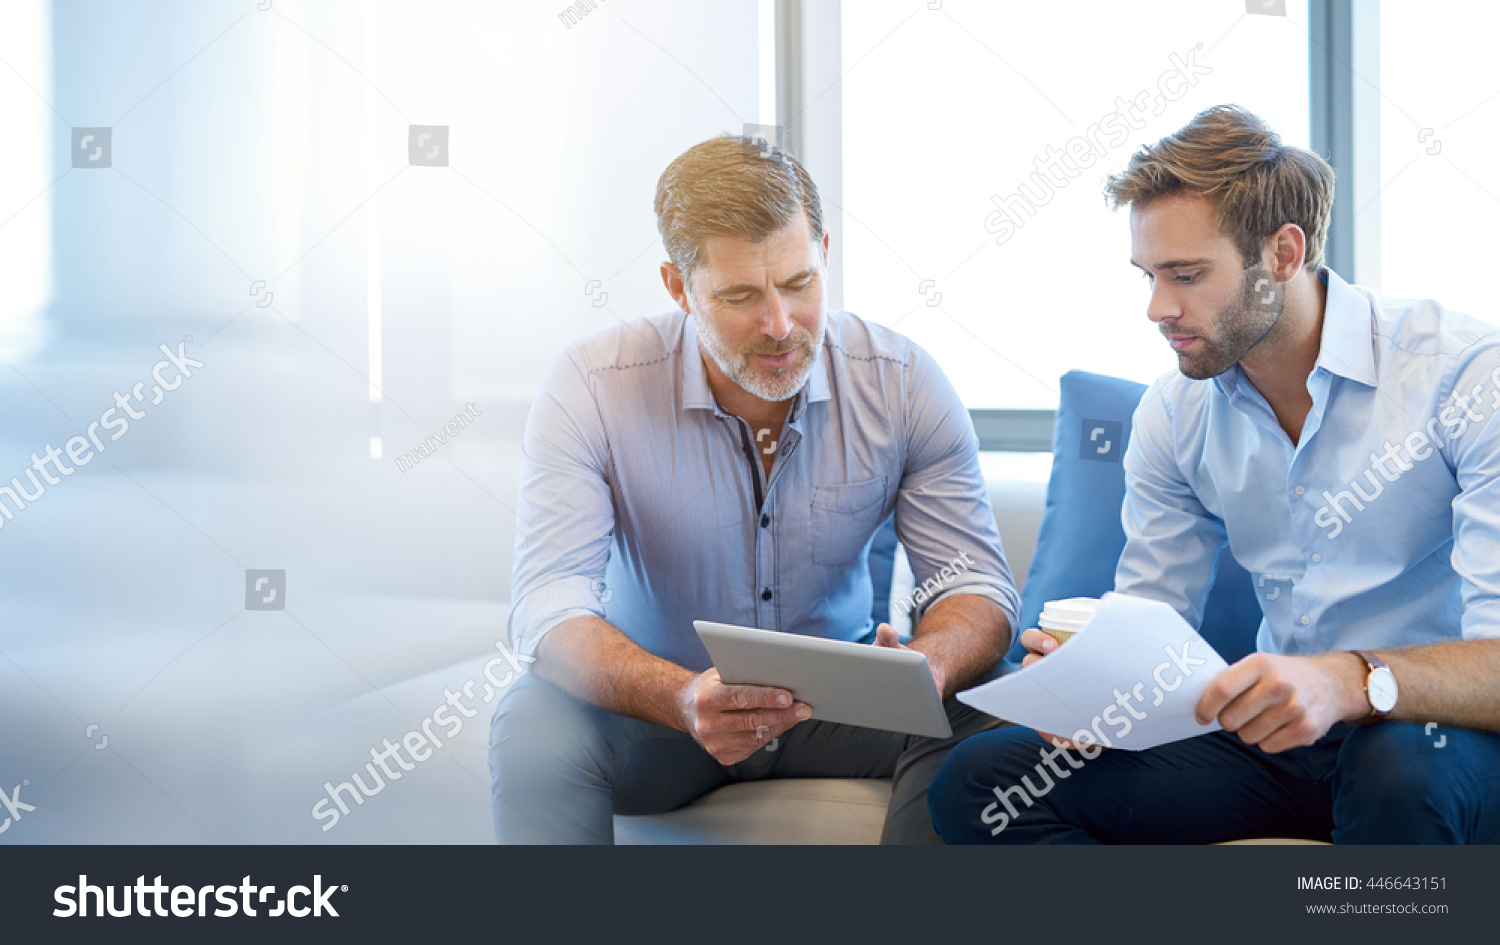 Mature businessman using a digital tablet to discuss information with a younger colleague in a modern business lounge #446643151